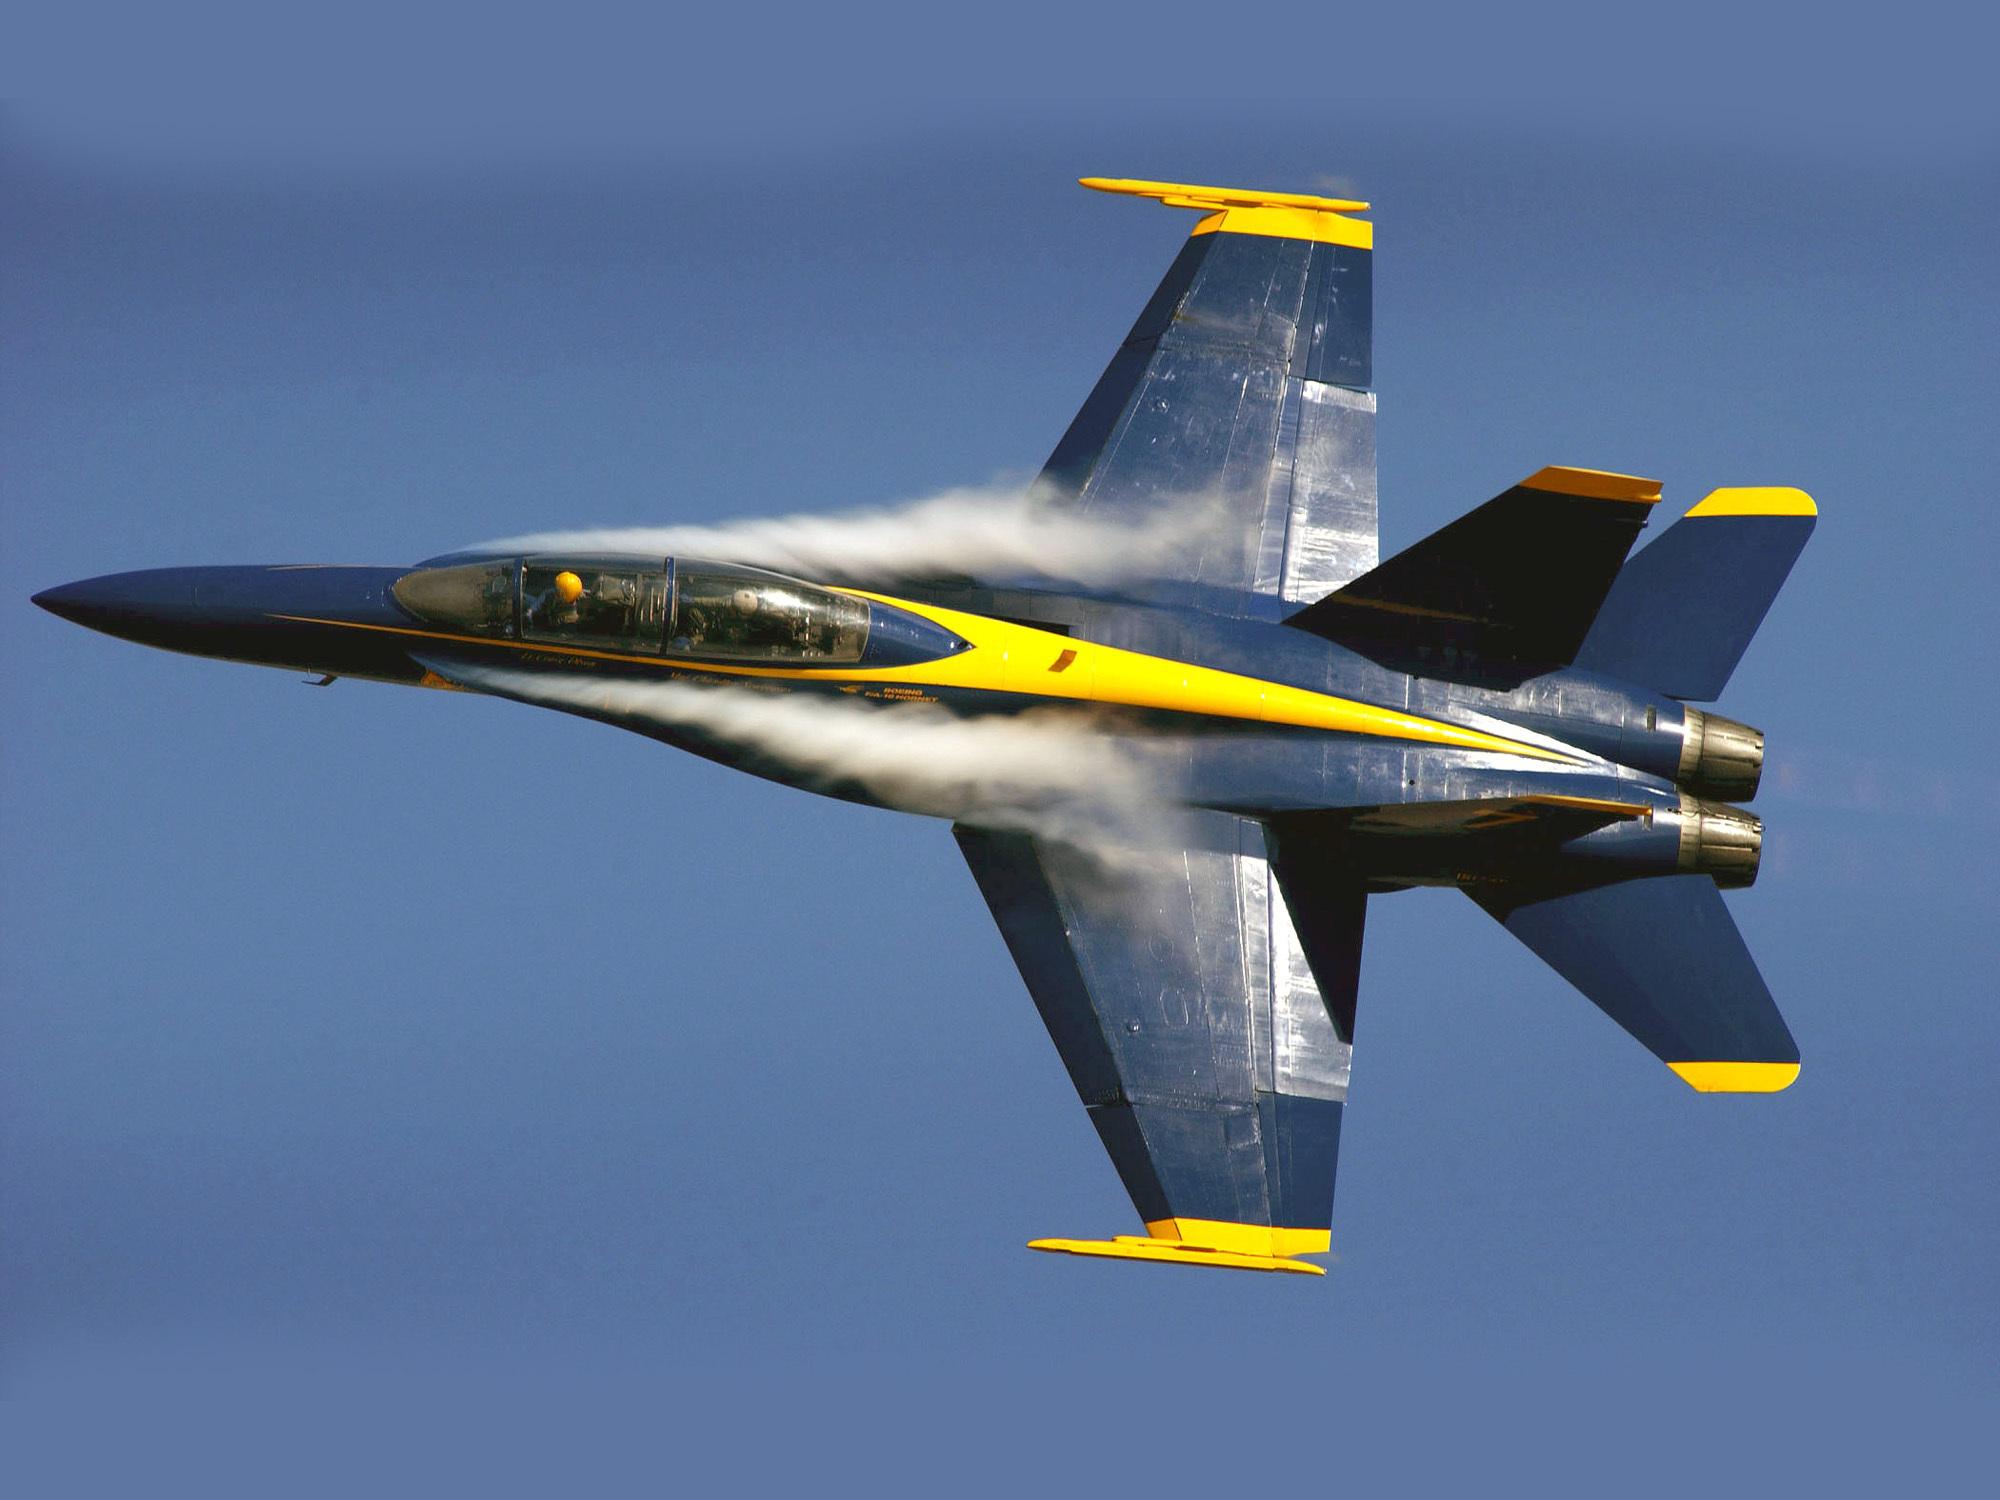 Navy Blue Angels Jet Crashes In Tennessee, Killing Pilot